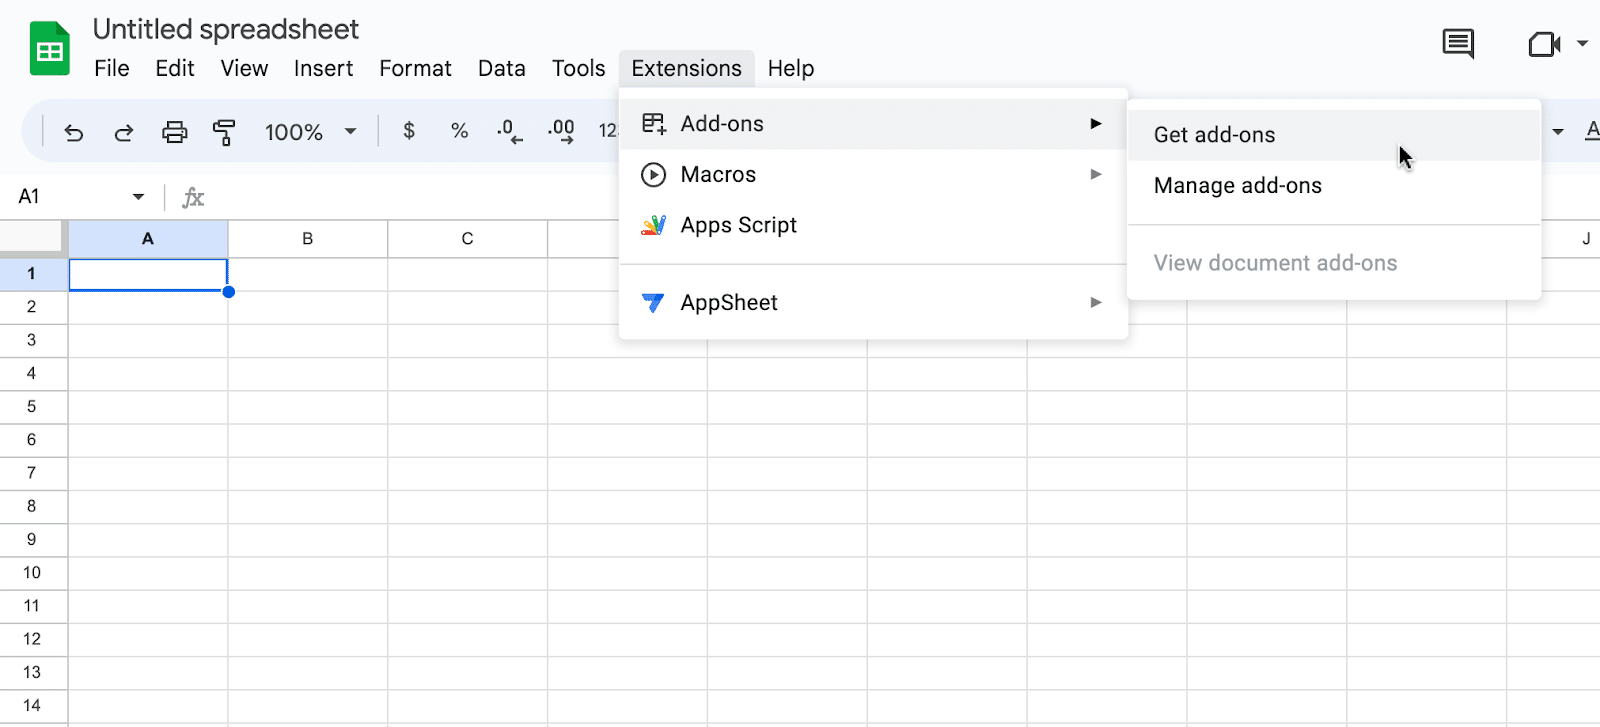 Navigating through the top menu in Google Sheets to click 'Extensions', then 'Add-ons', and selecting 'Get add-ons'.